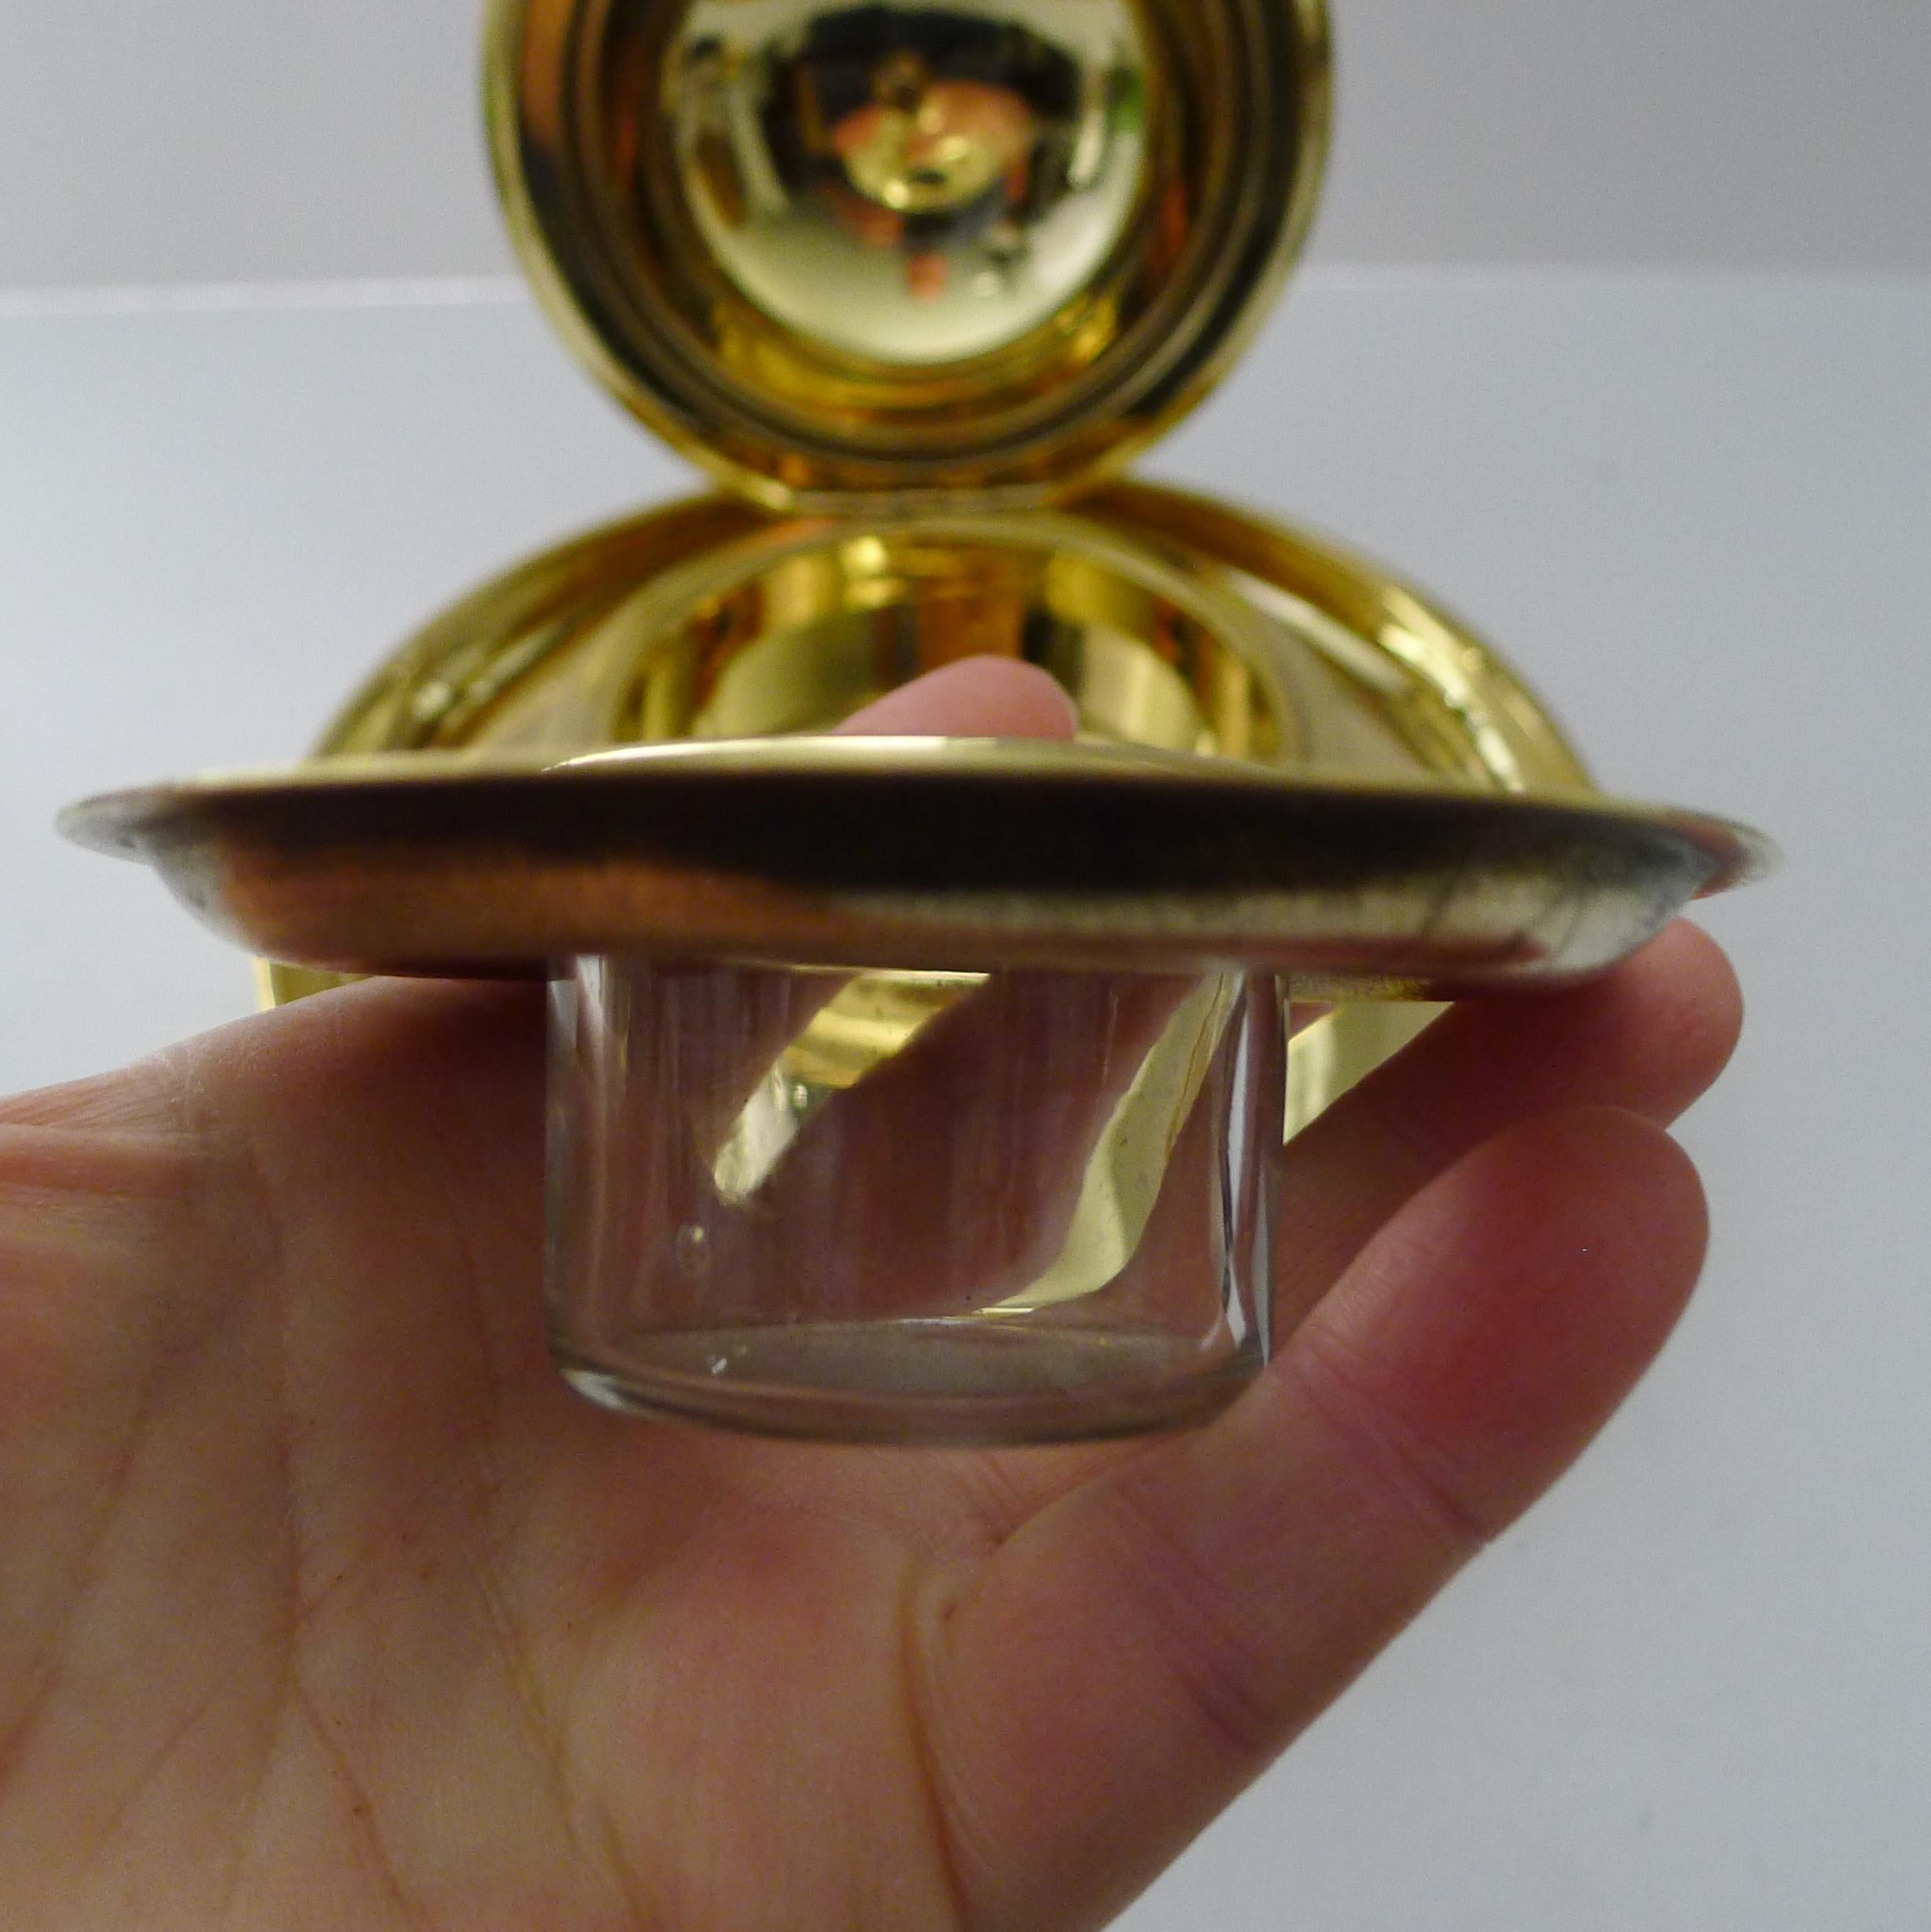 A truly outstanding and rare find, this is an outstanding Victorian figural inkwell made from a winning combination of brass and silver plate and retaining his wonderful two original glass eyes without damage.

The size is impressive, this is one